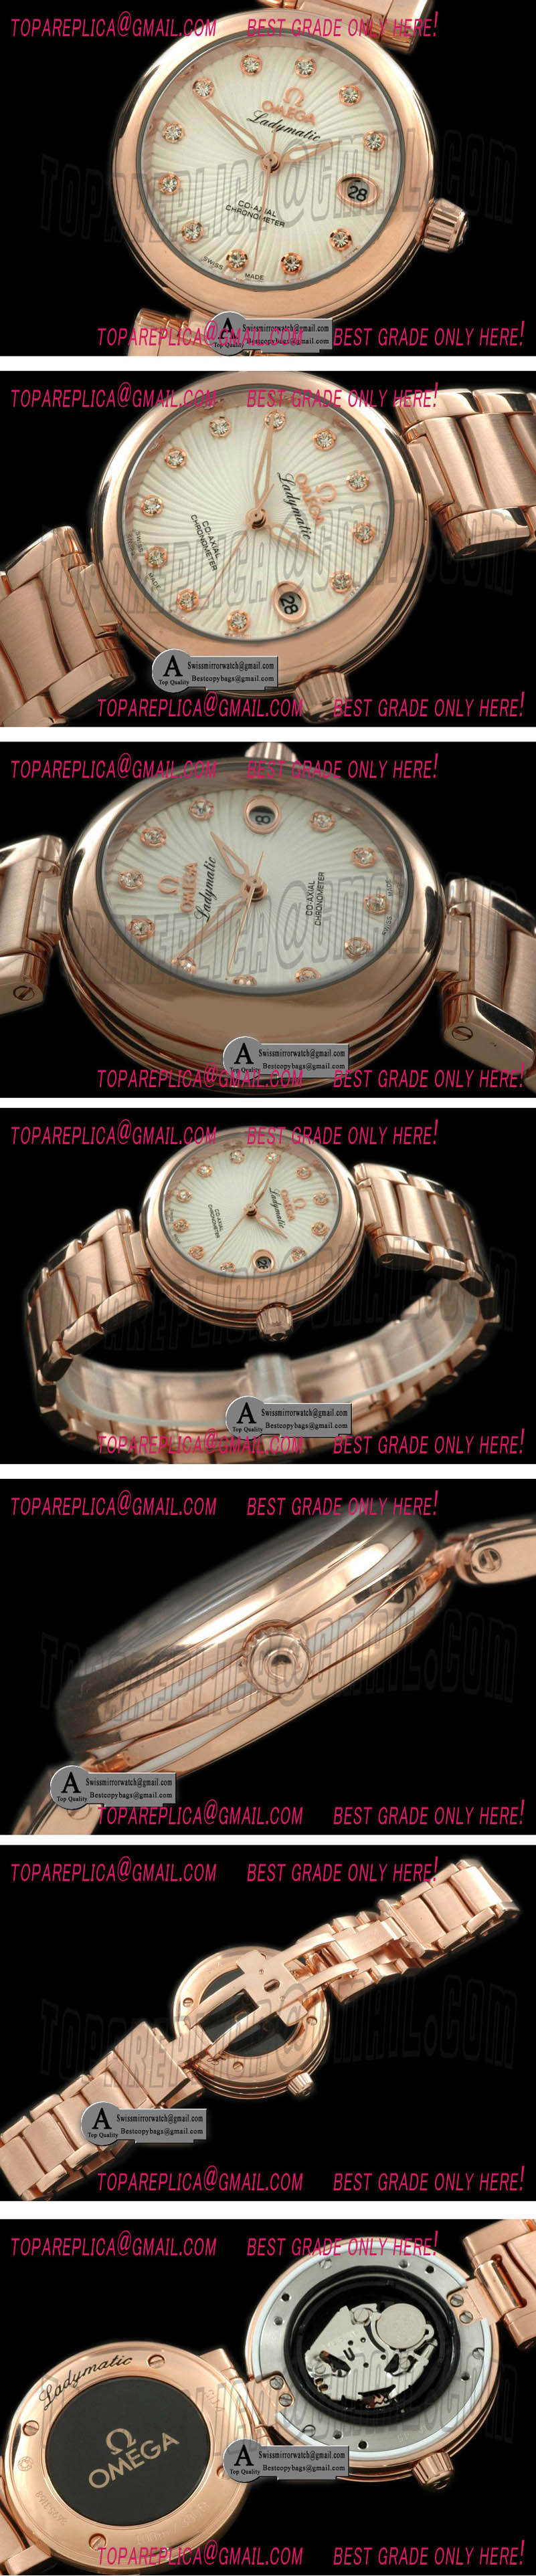 Omega 425.60.34.20.55.001 Deville Ladymatic Rose Gold/Rose Gold White Swiss Qtz Replica Watches